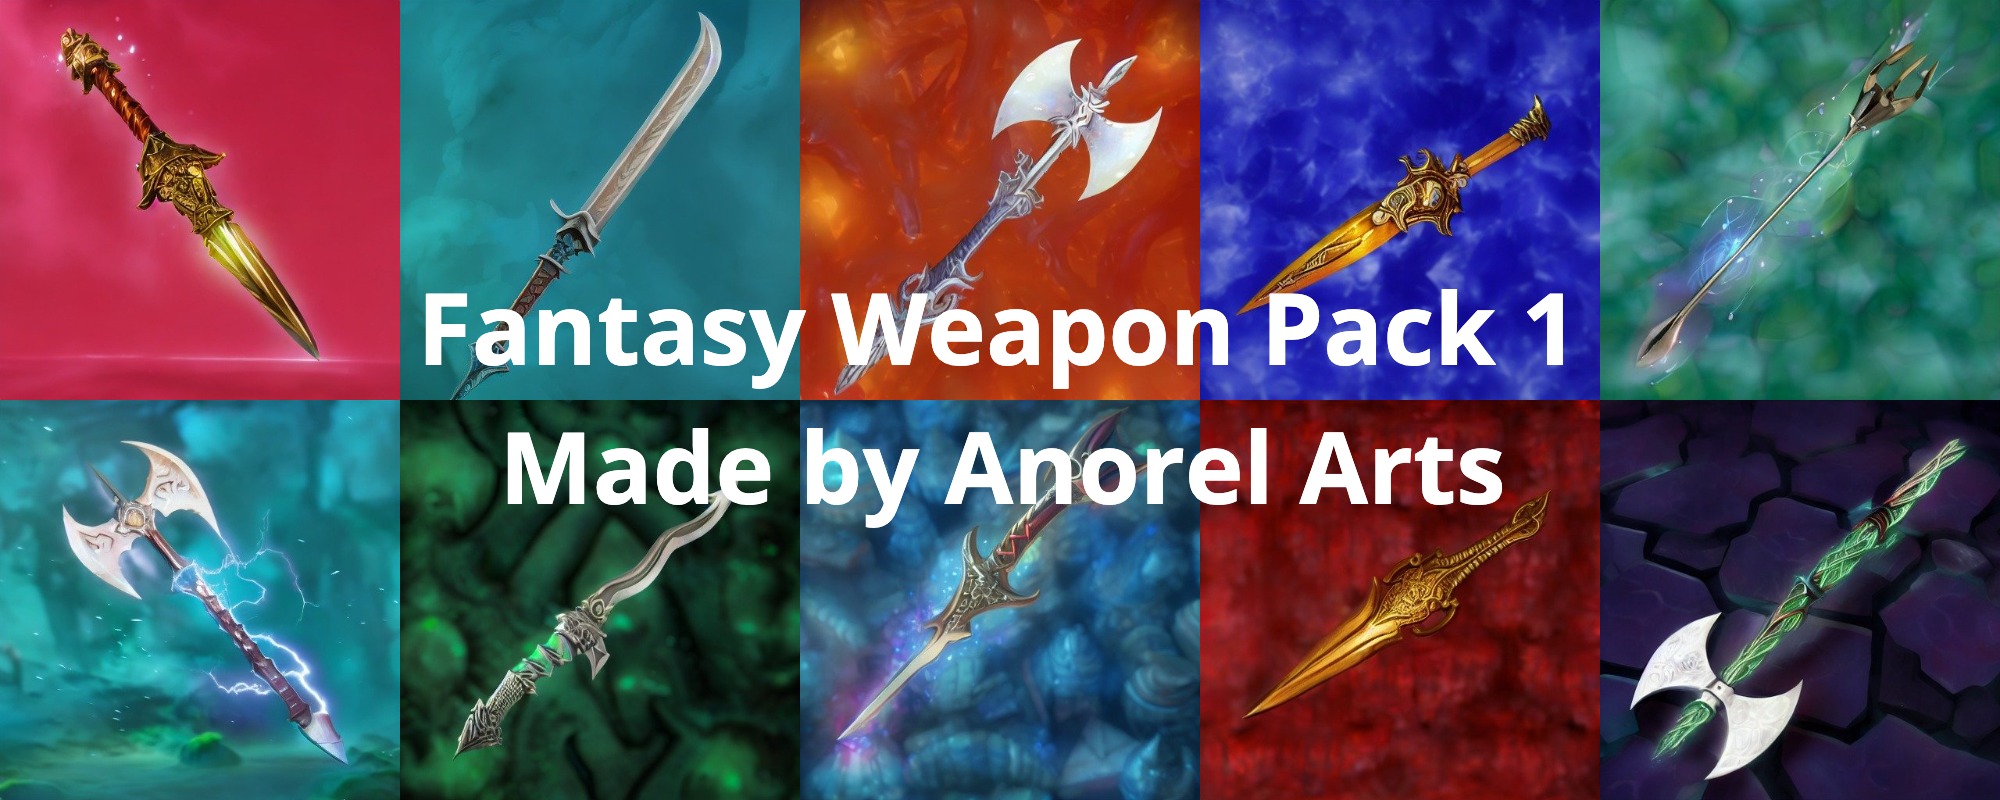 Fantasy Weapons Pack 1